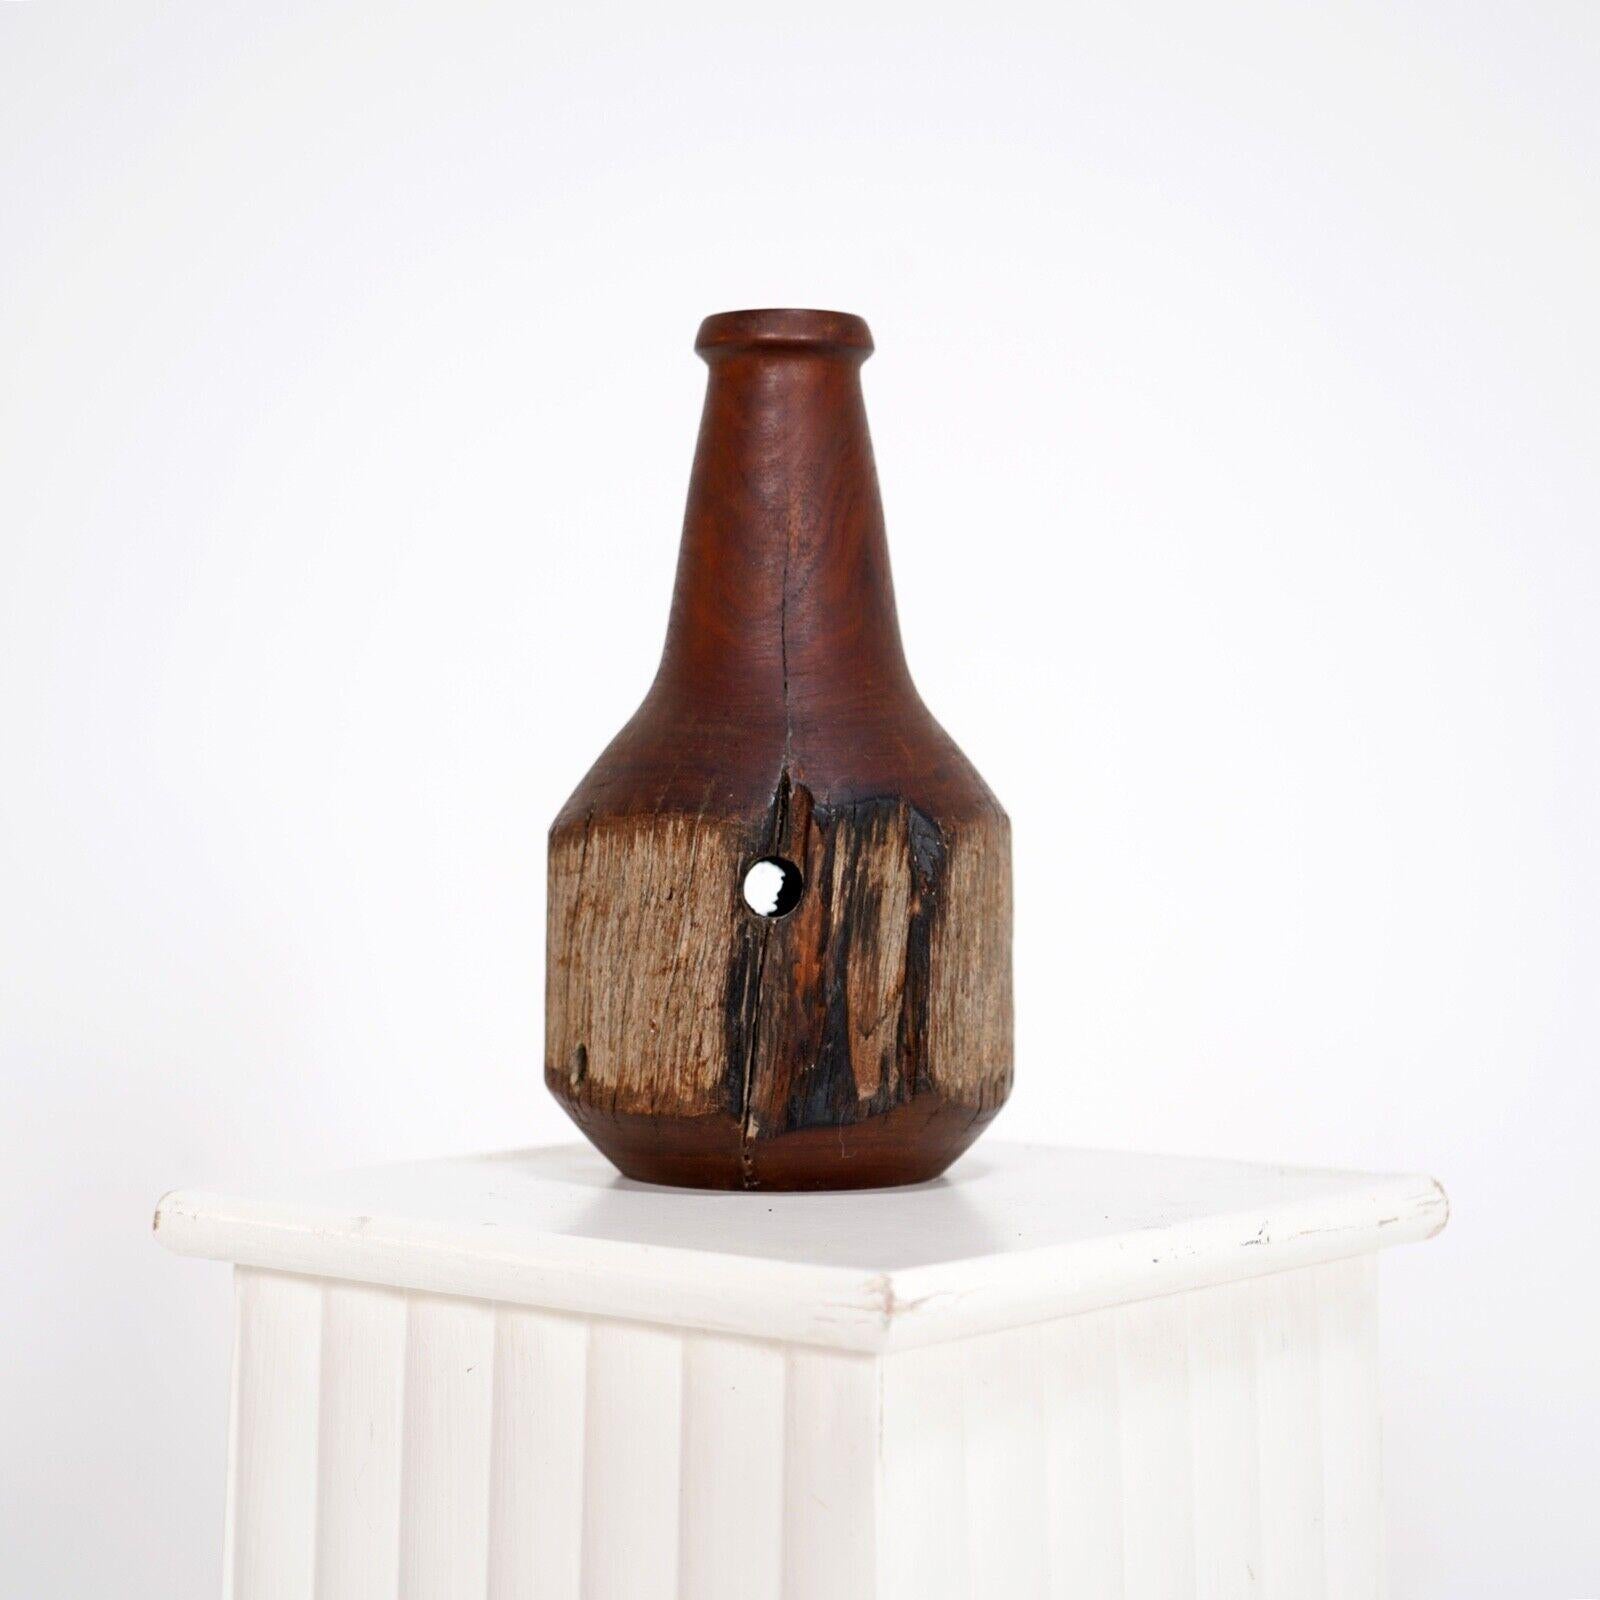 British Turned Wooden Sculpture of a Bottle For Sale